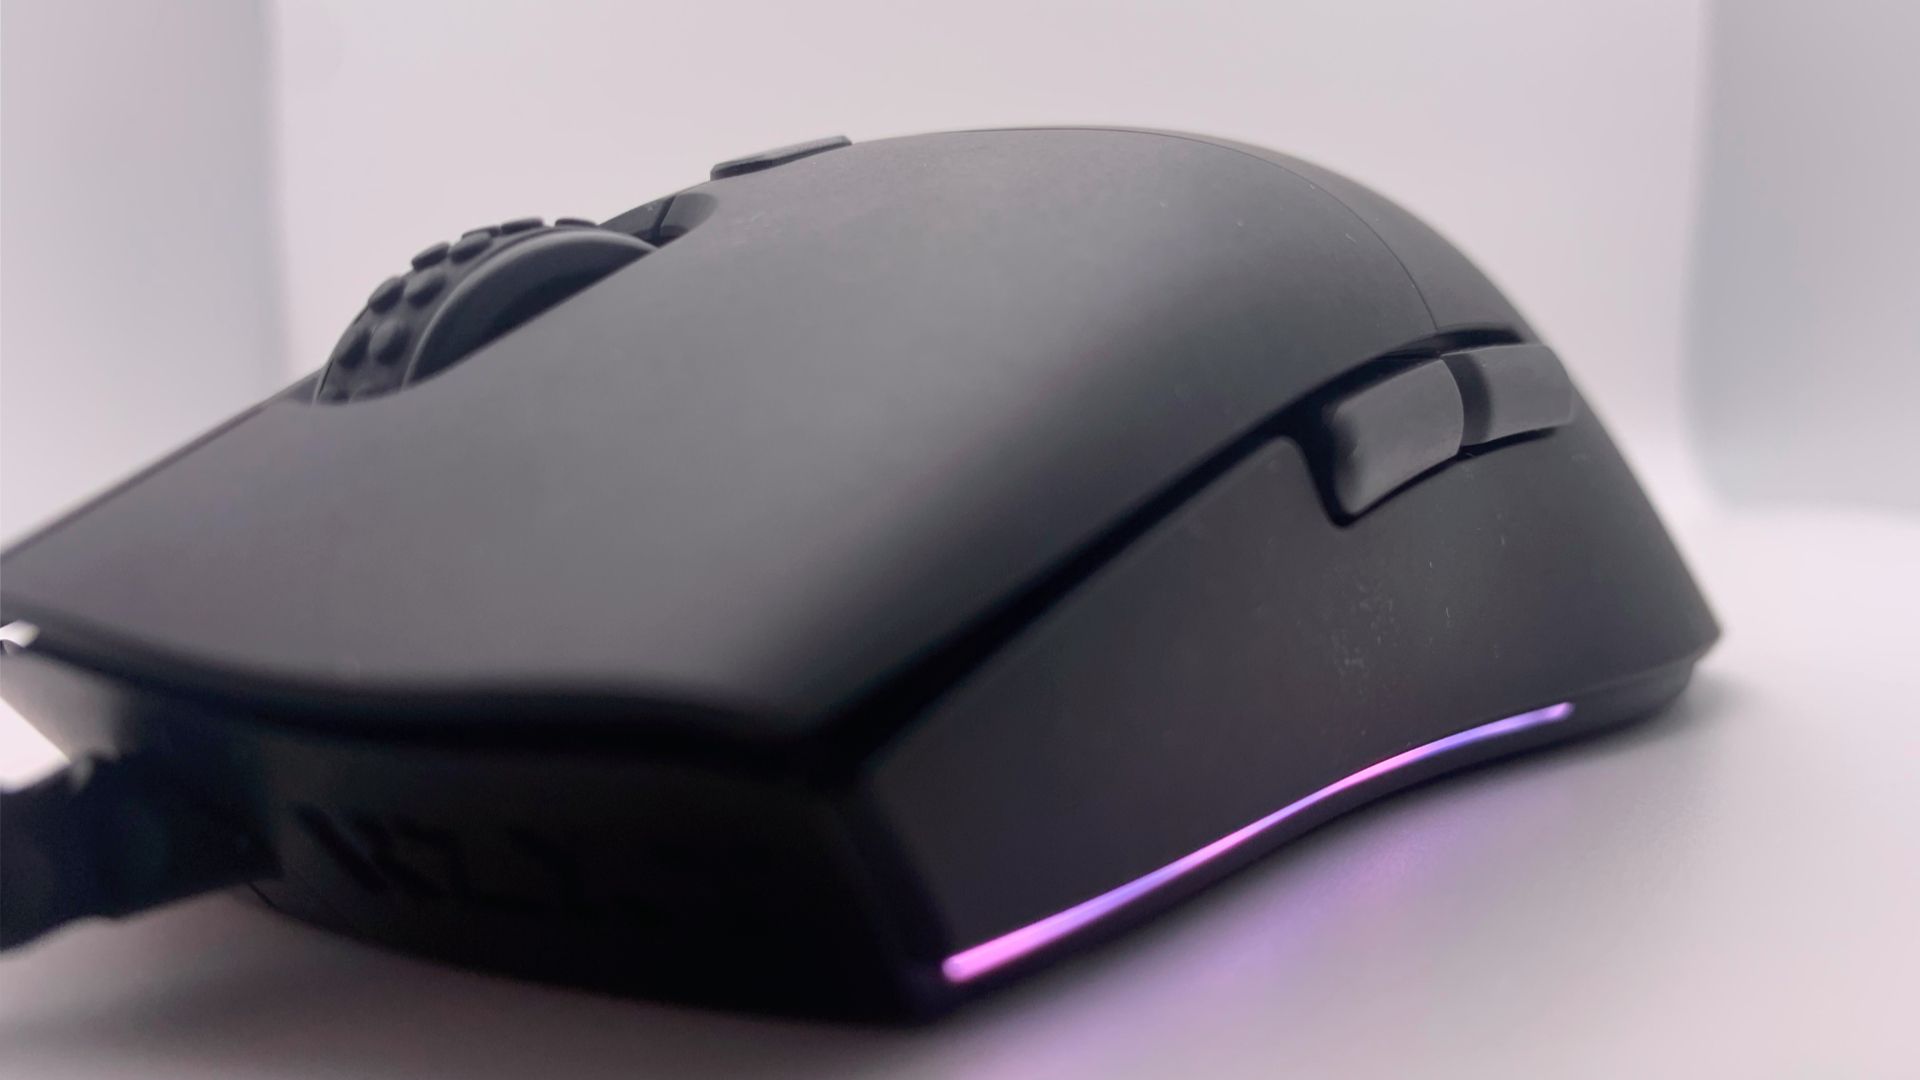 Lift Gaming Mouse